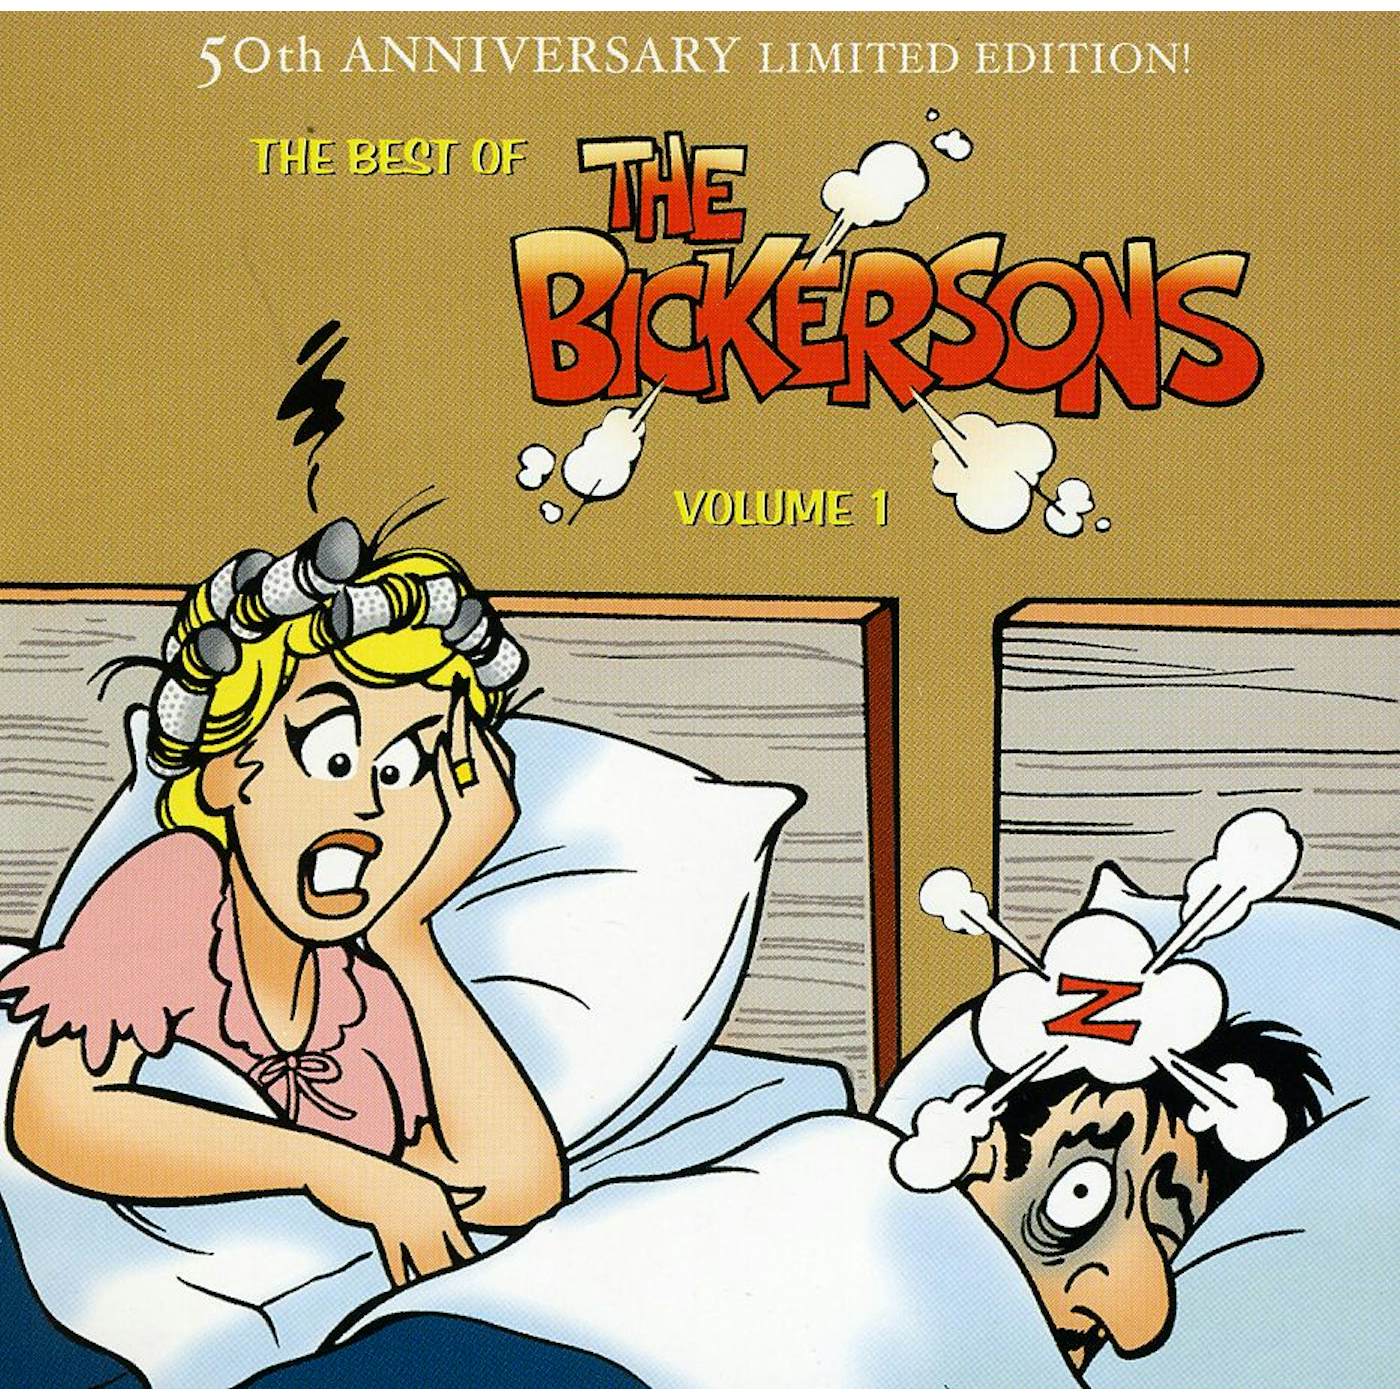 The Bickersons 50TH ANNIVERSARY LIMITED EDITION! VOL 1 CD